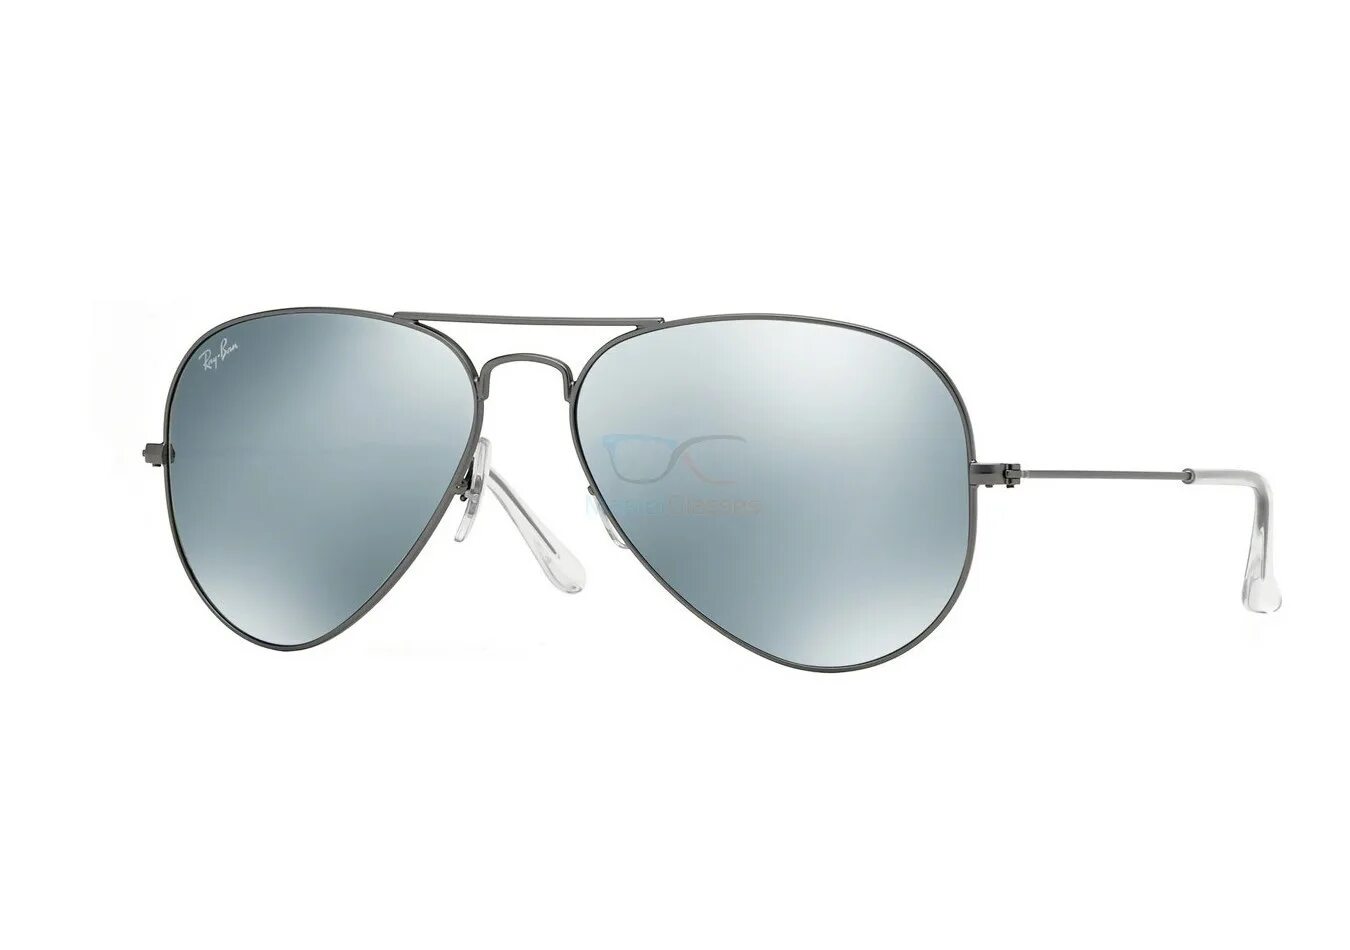 Ray-ban 3025 w3277 Aviator. Ray ban Aviator 3025. Ray ban rb3025 Aviator. Ray-ban RB 3025 w3277.